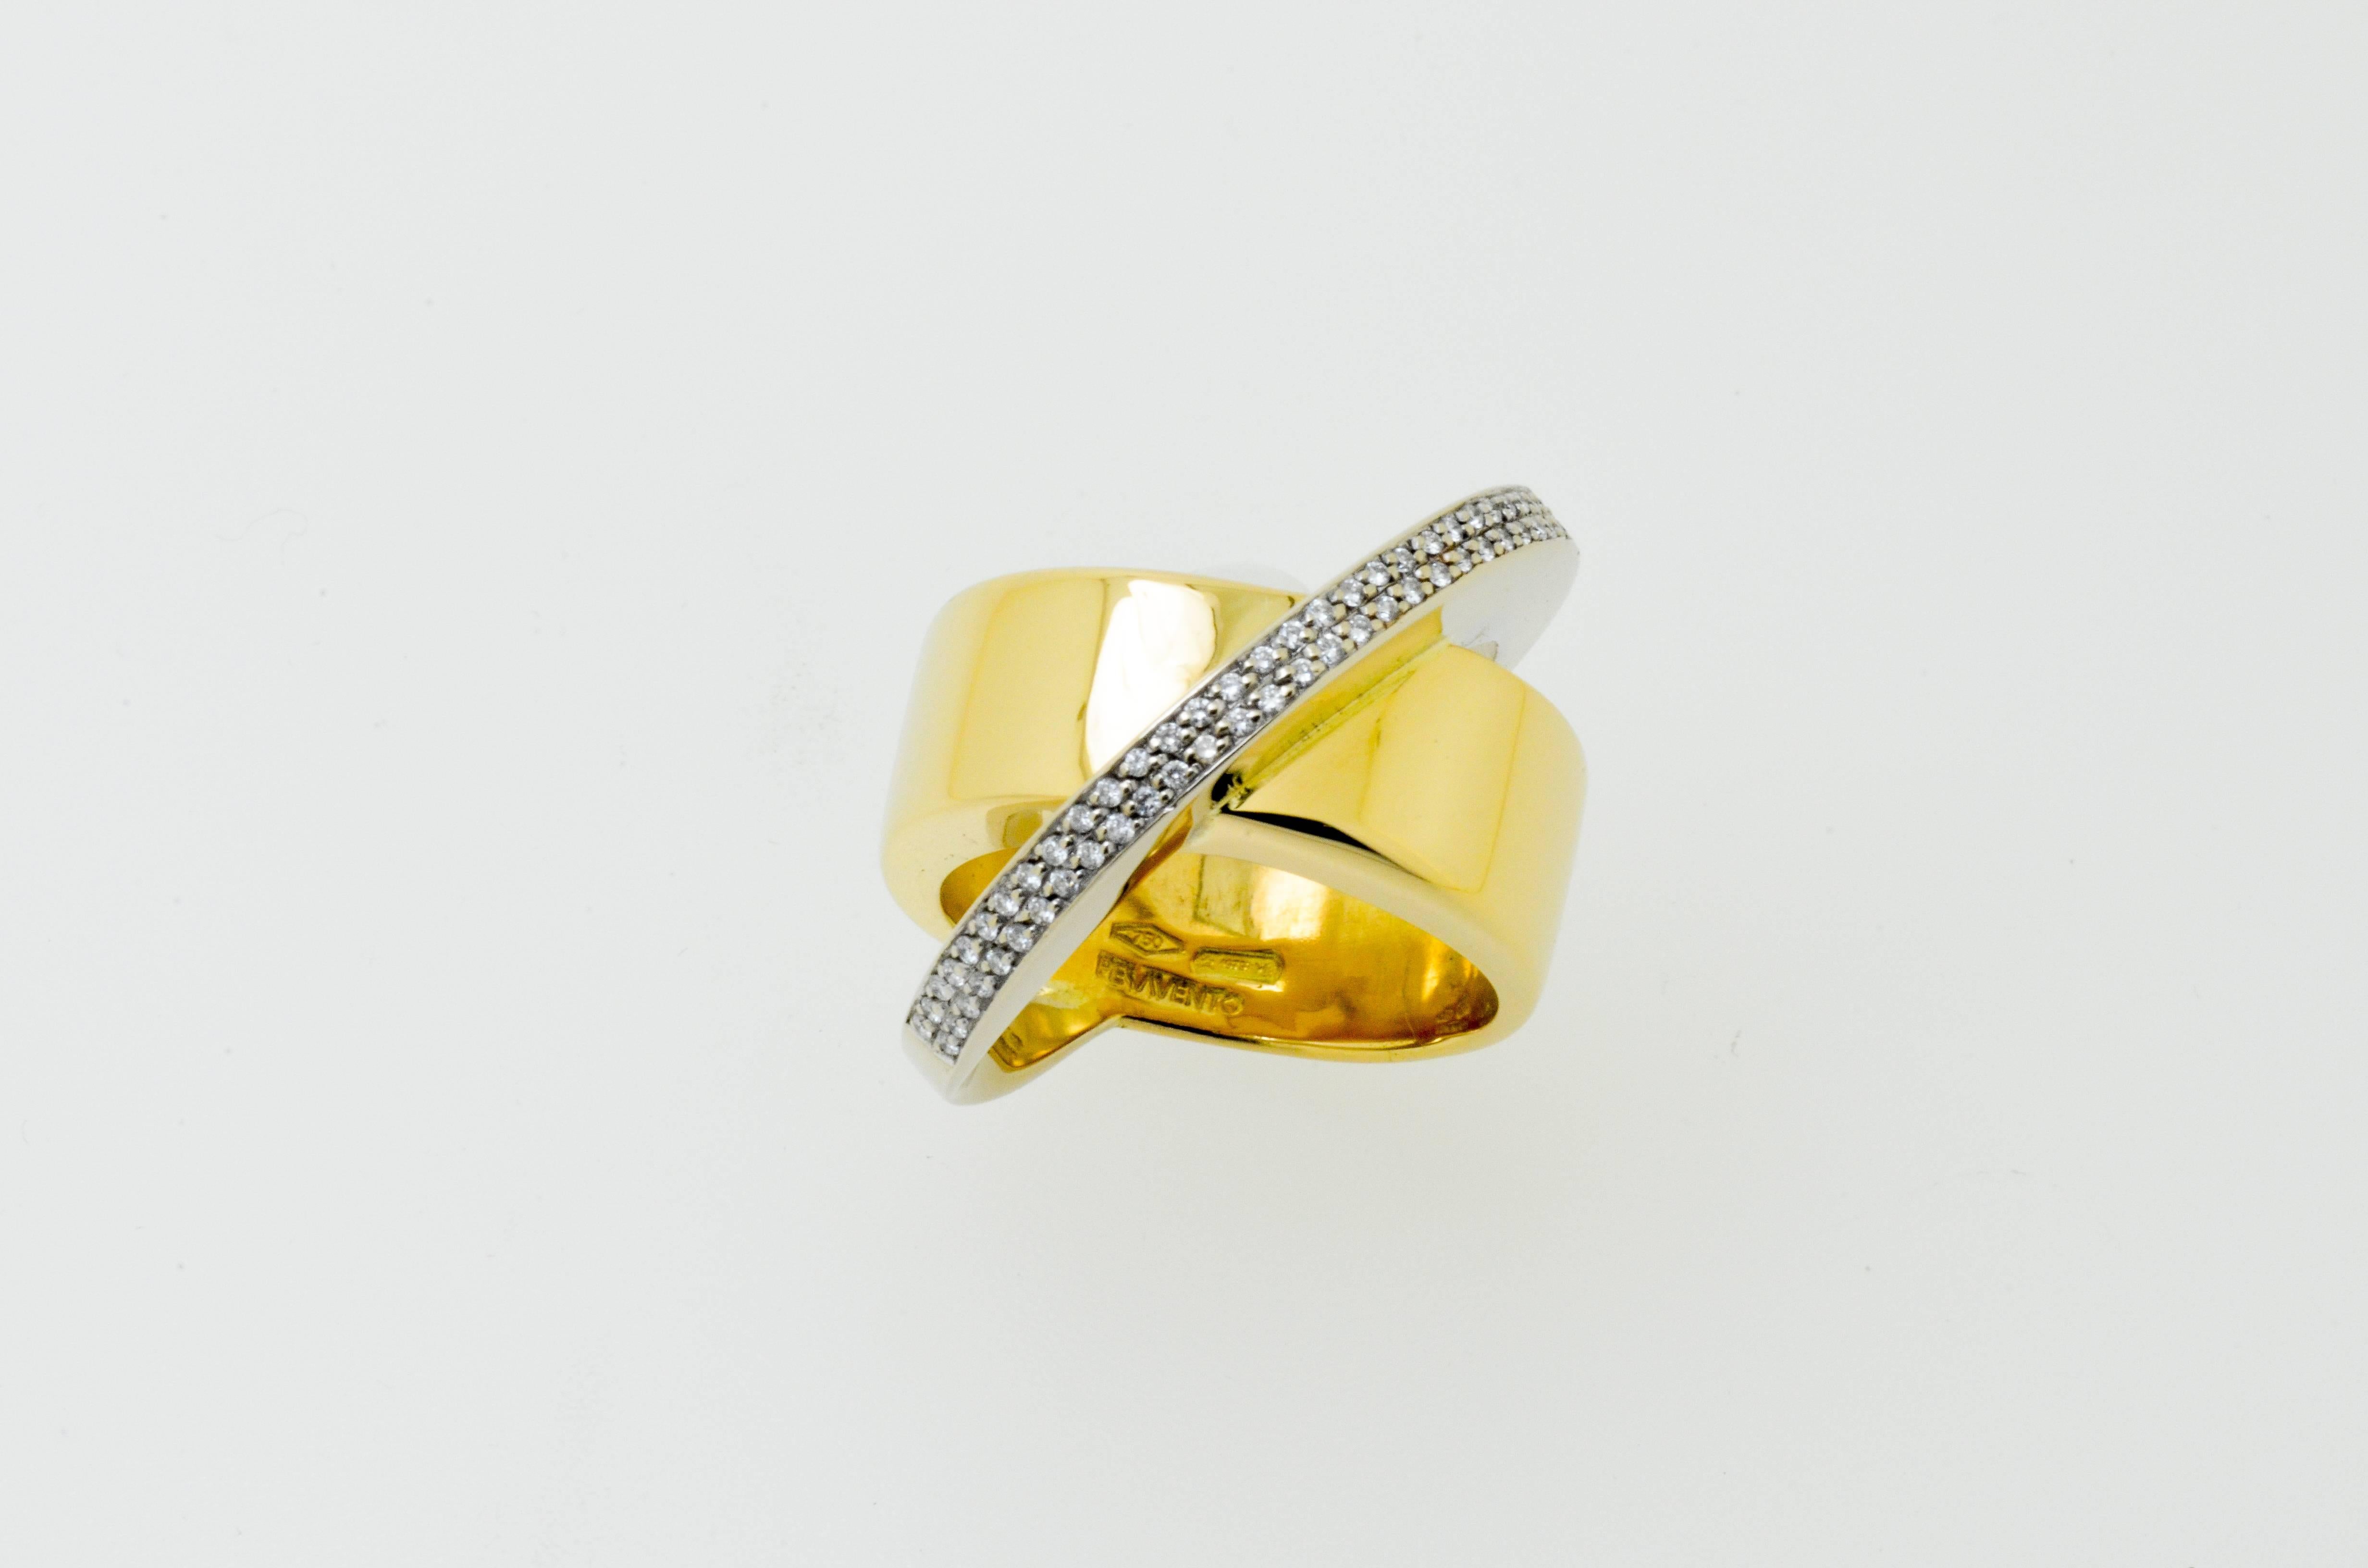 One 18 Karat yellow and white gold diamond Pesavento ring consisting of 0.50 carats of clean white briliant cut diamonds.

Size: M